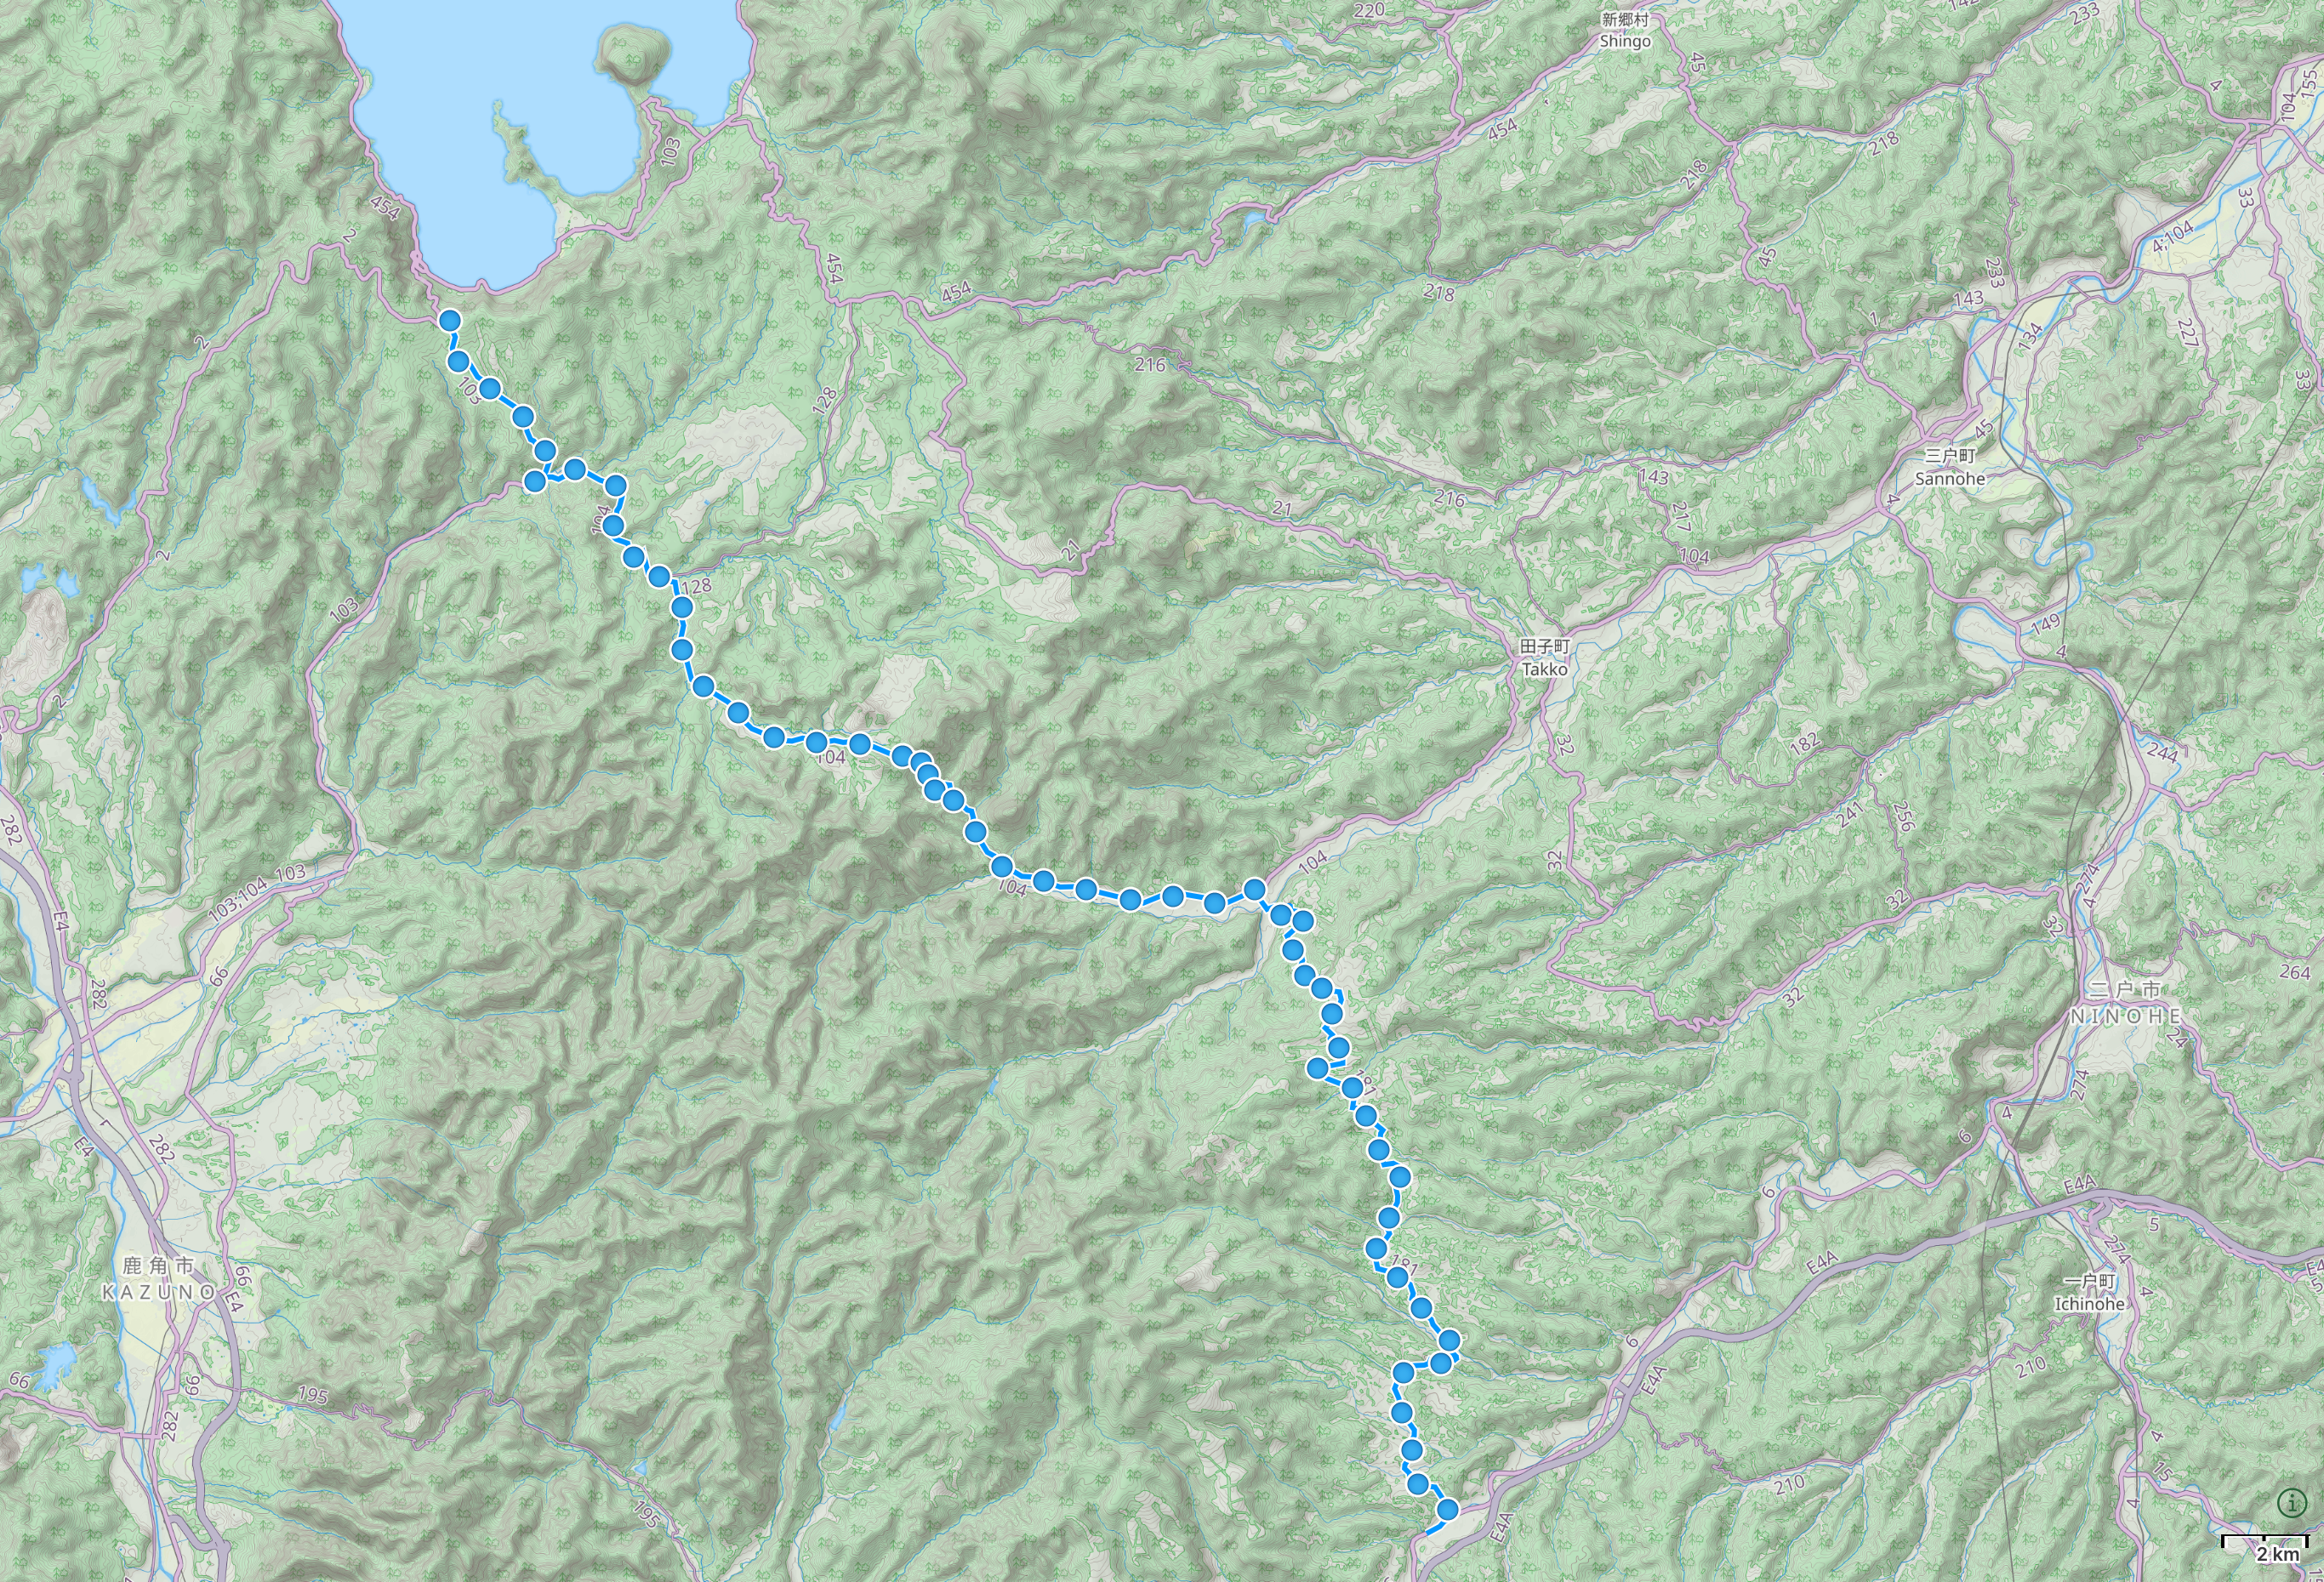 Map of Tōhoku with author’s route from Jōbōji, Iwate to Lake Towada highlighted.